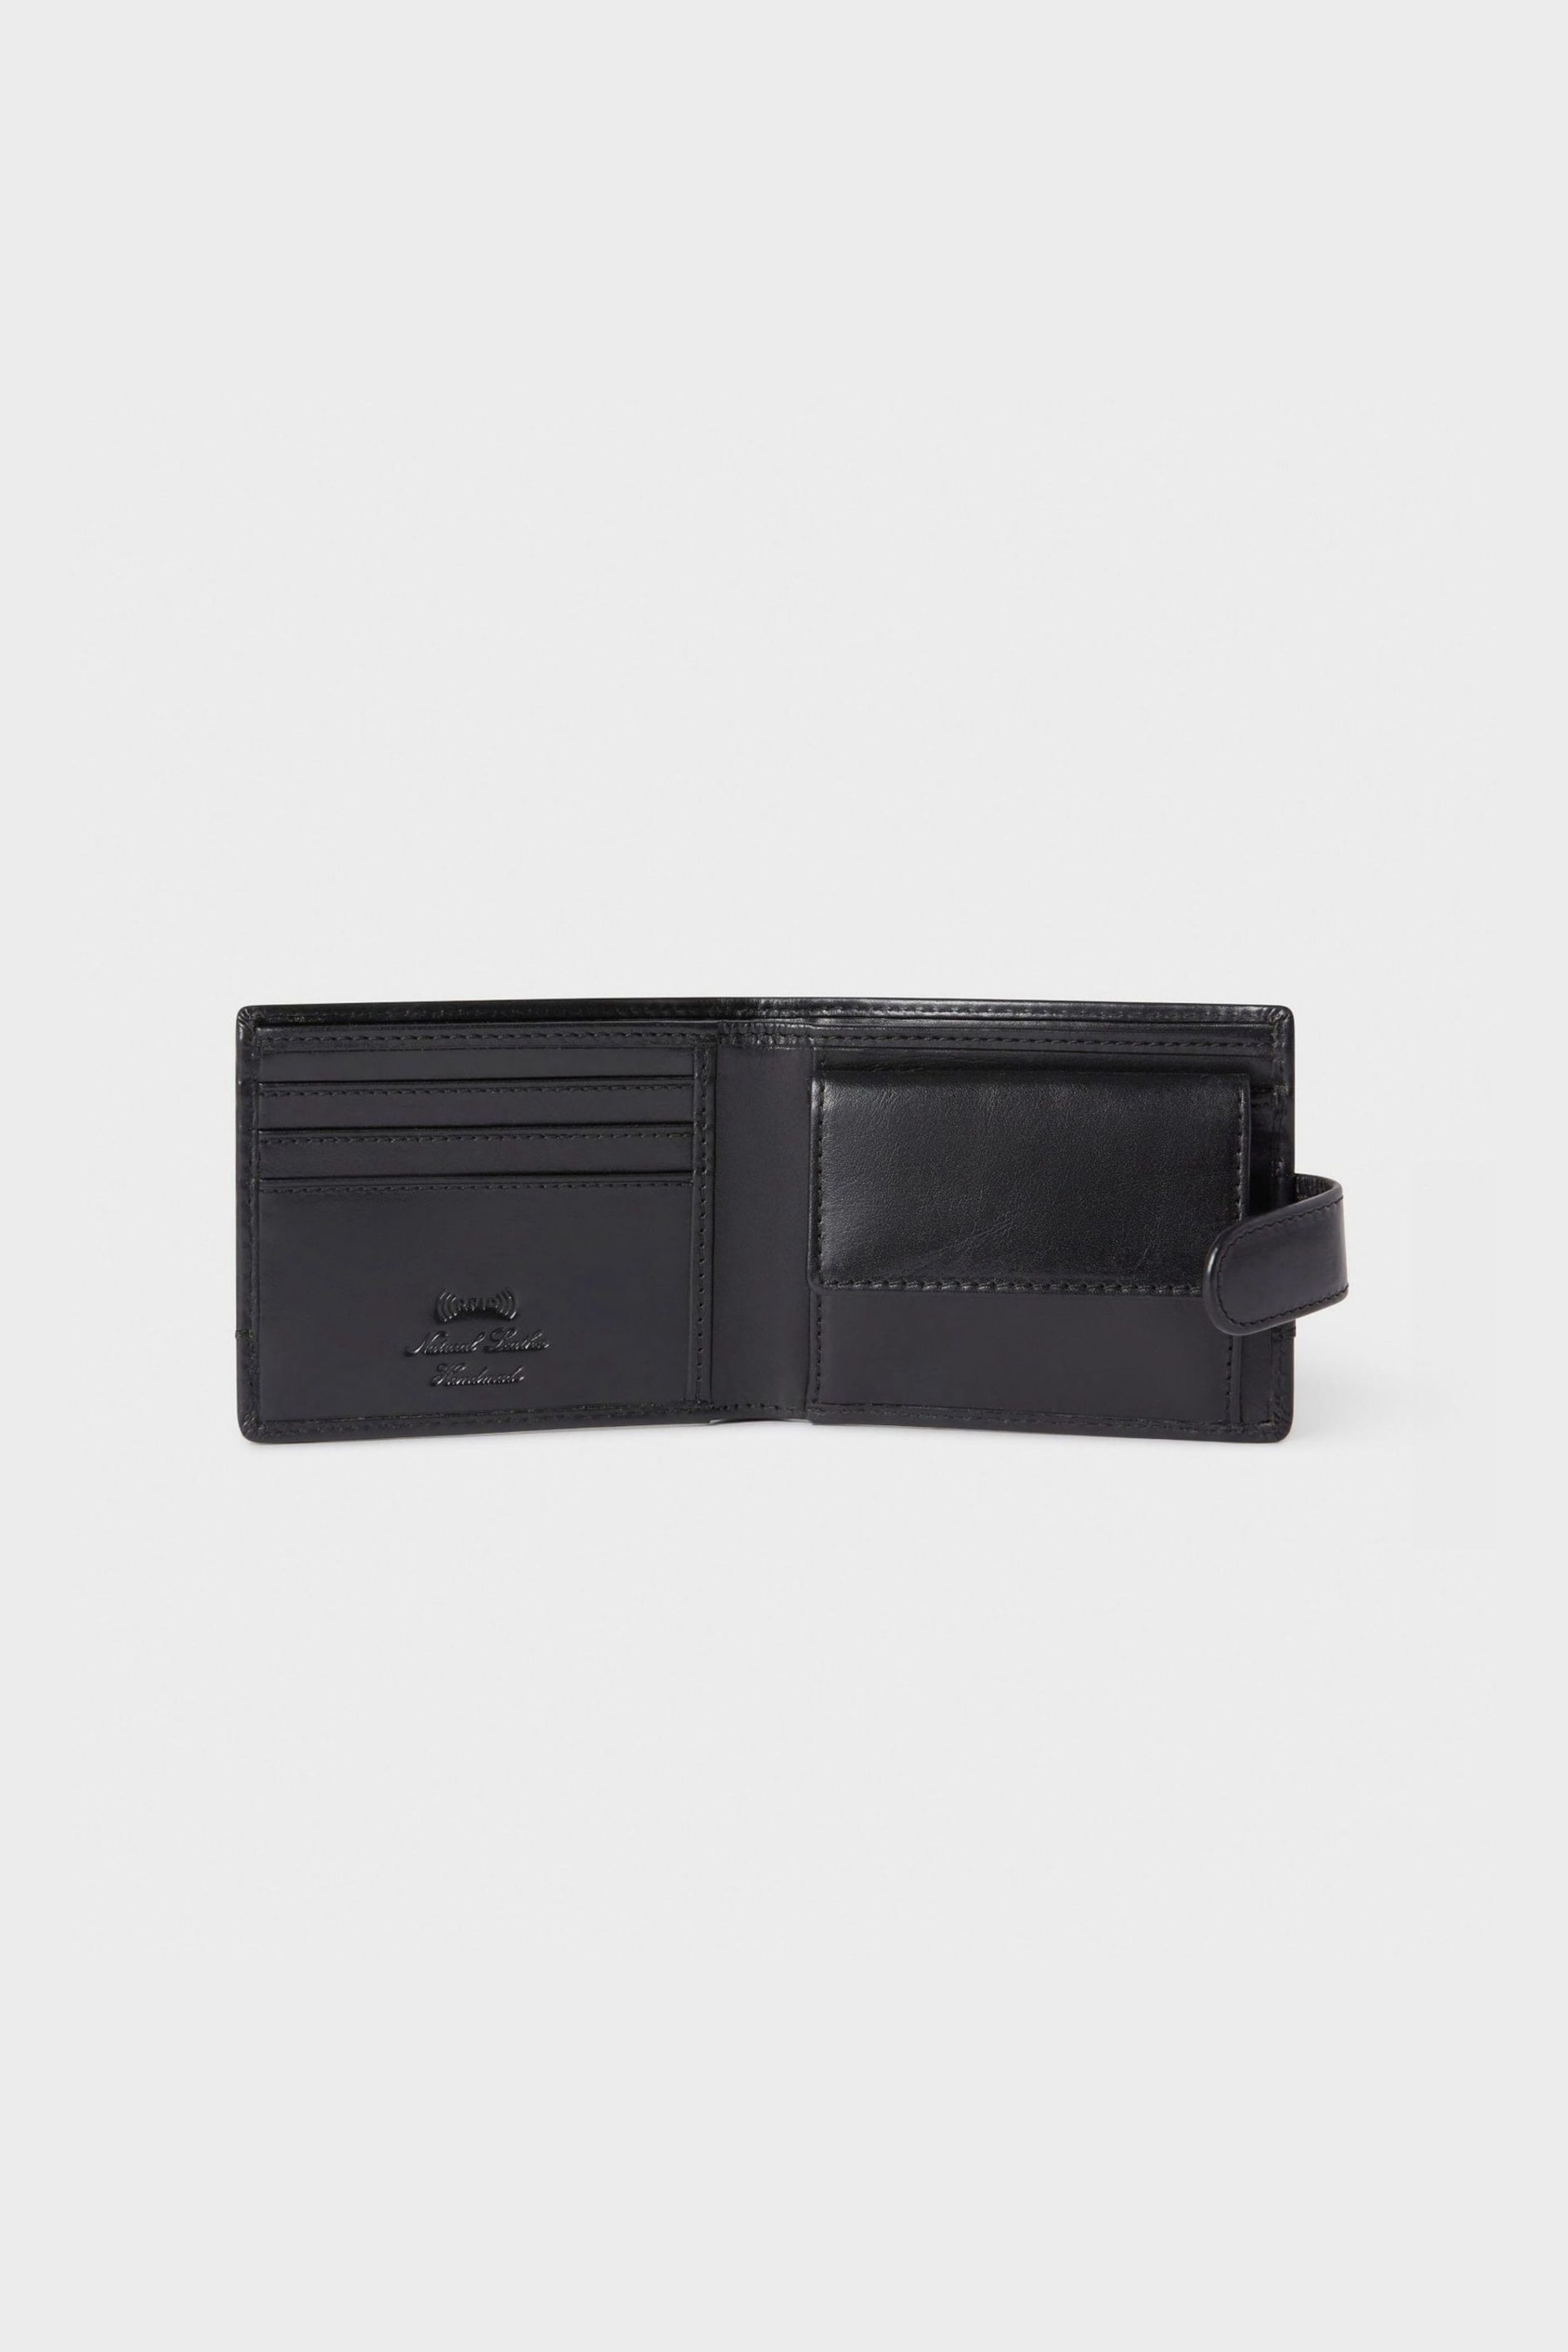 Osprey London The London Leather Coin Wallet - Image 4 of 5